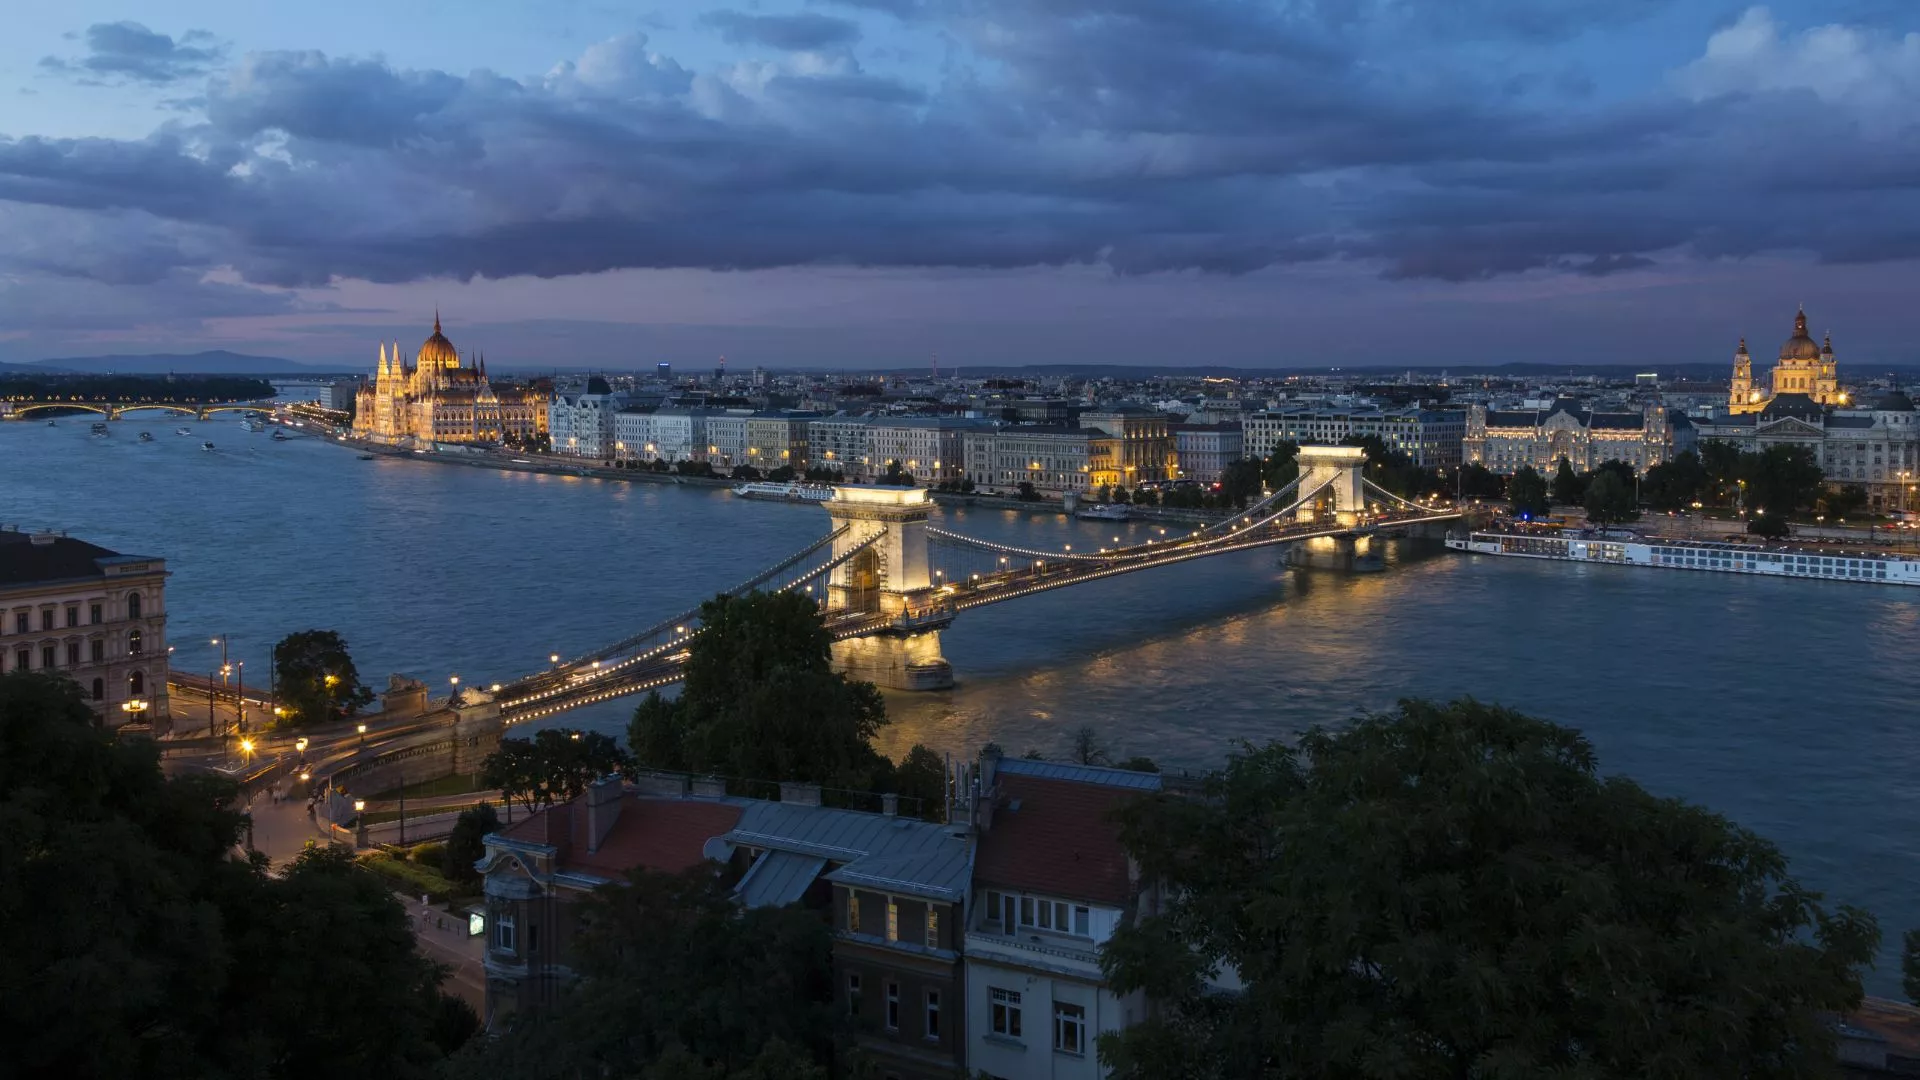 AxxonSoft VMS provides security for the Hungary’s largest office building